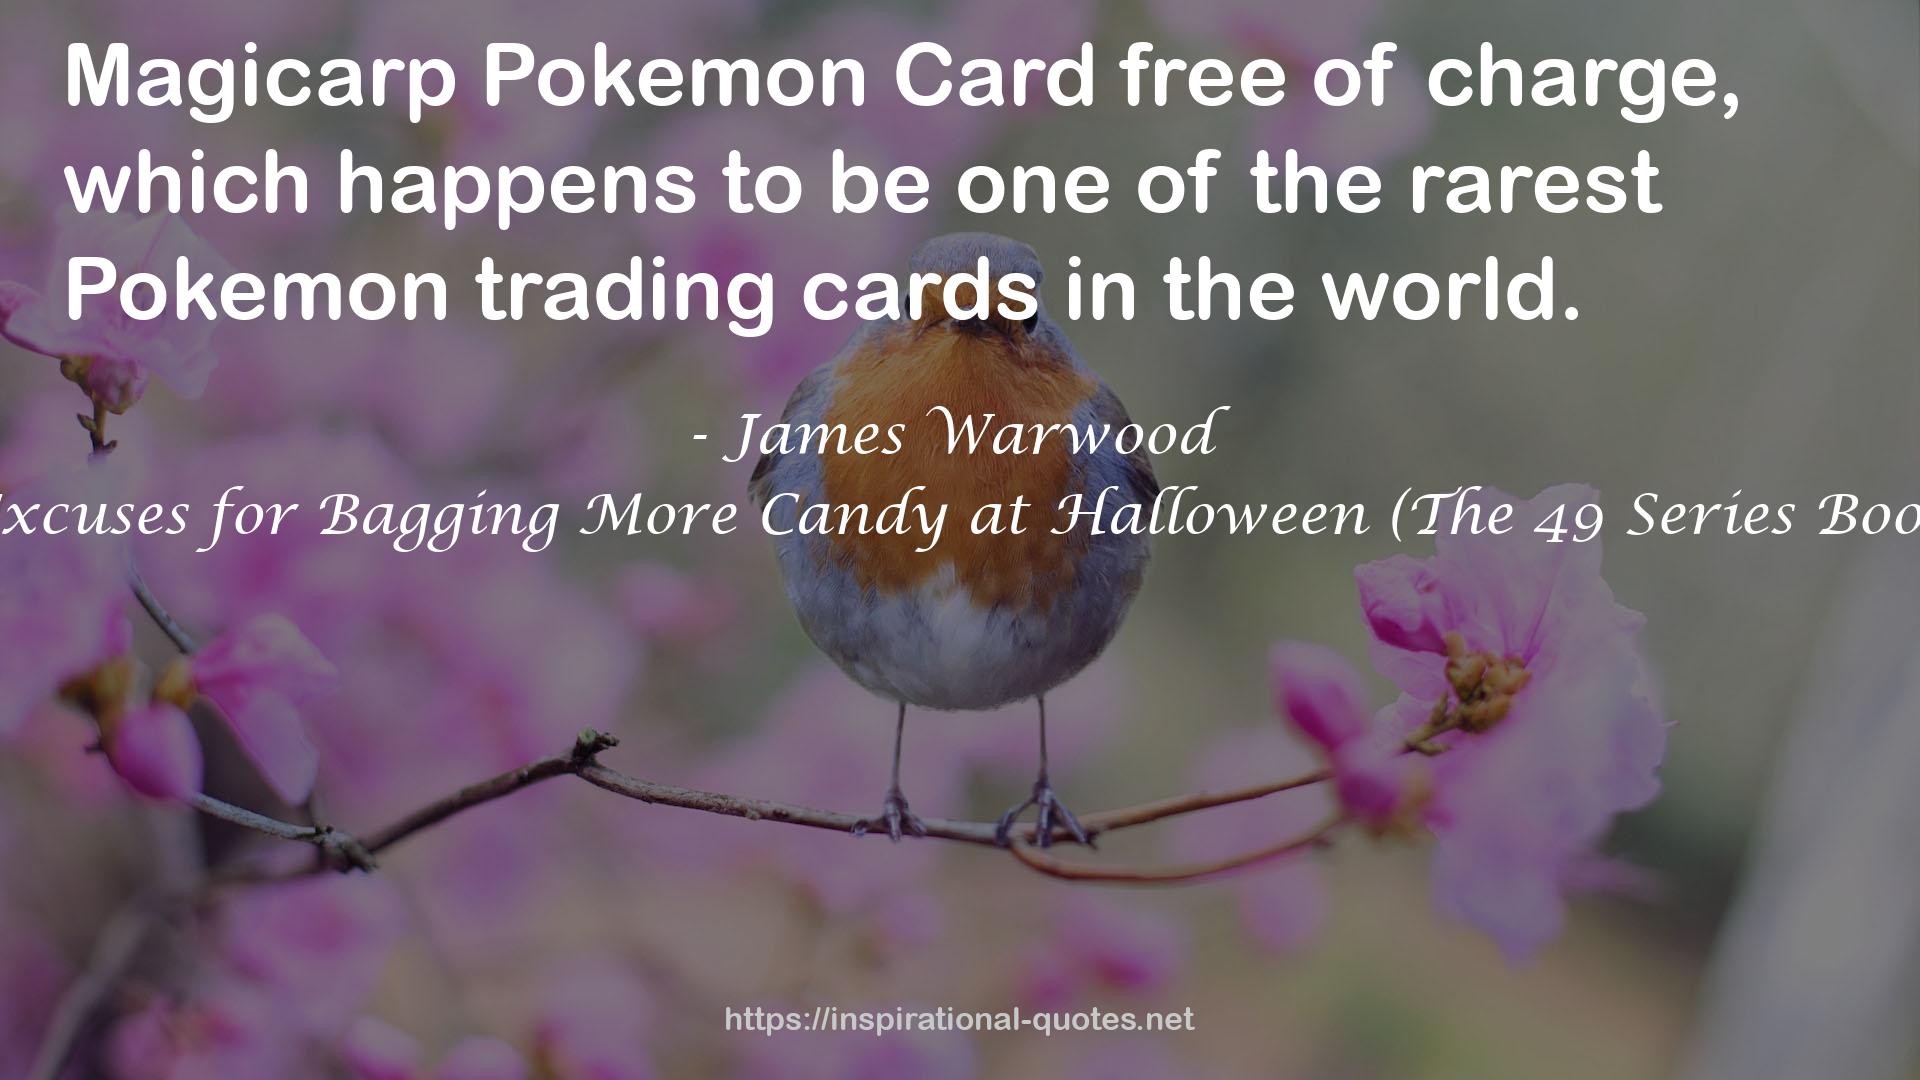 49 Excuses for Bagging More Candy at Halloween (The 49 Series Book 12) QUOTES